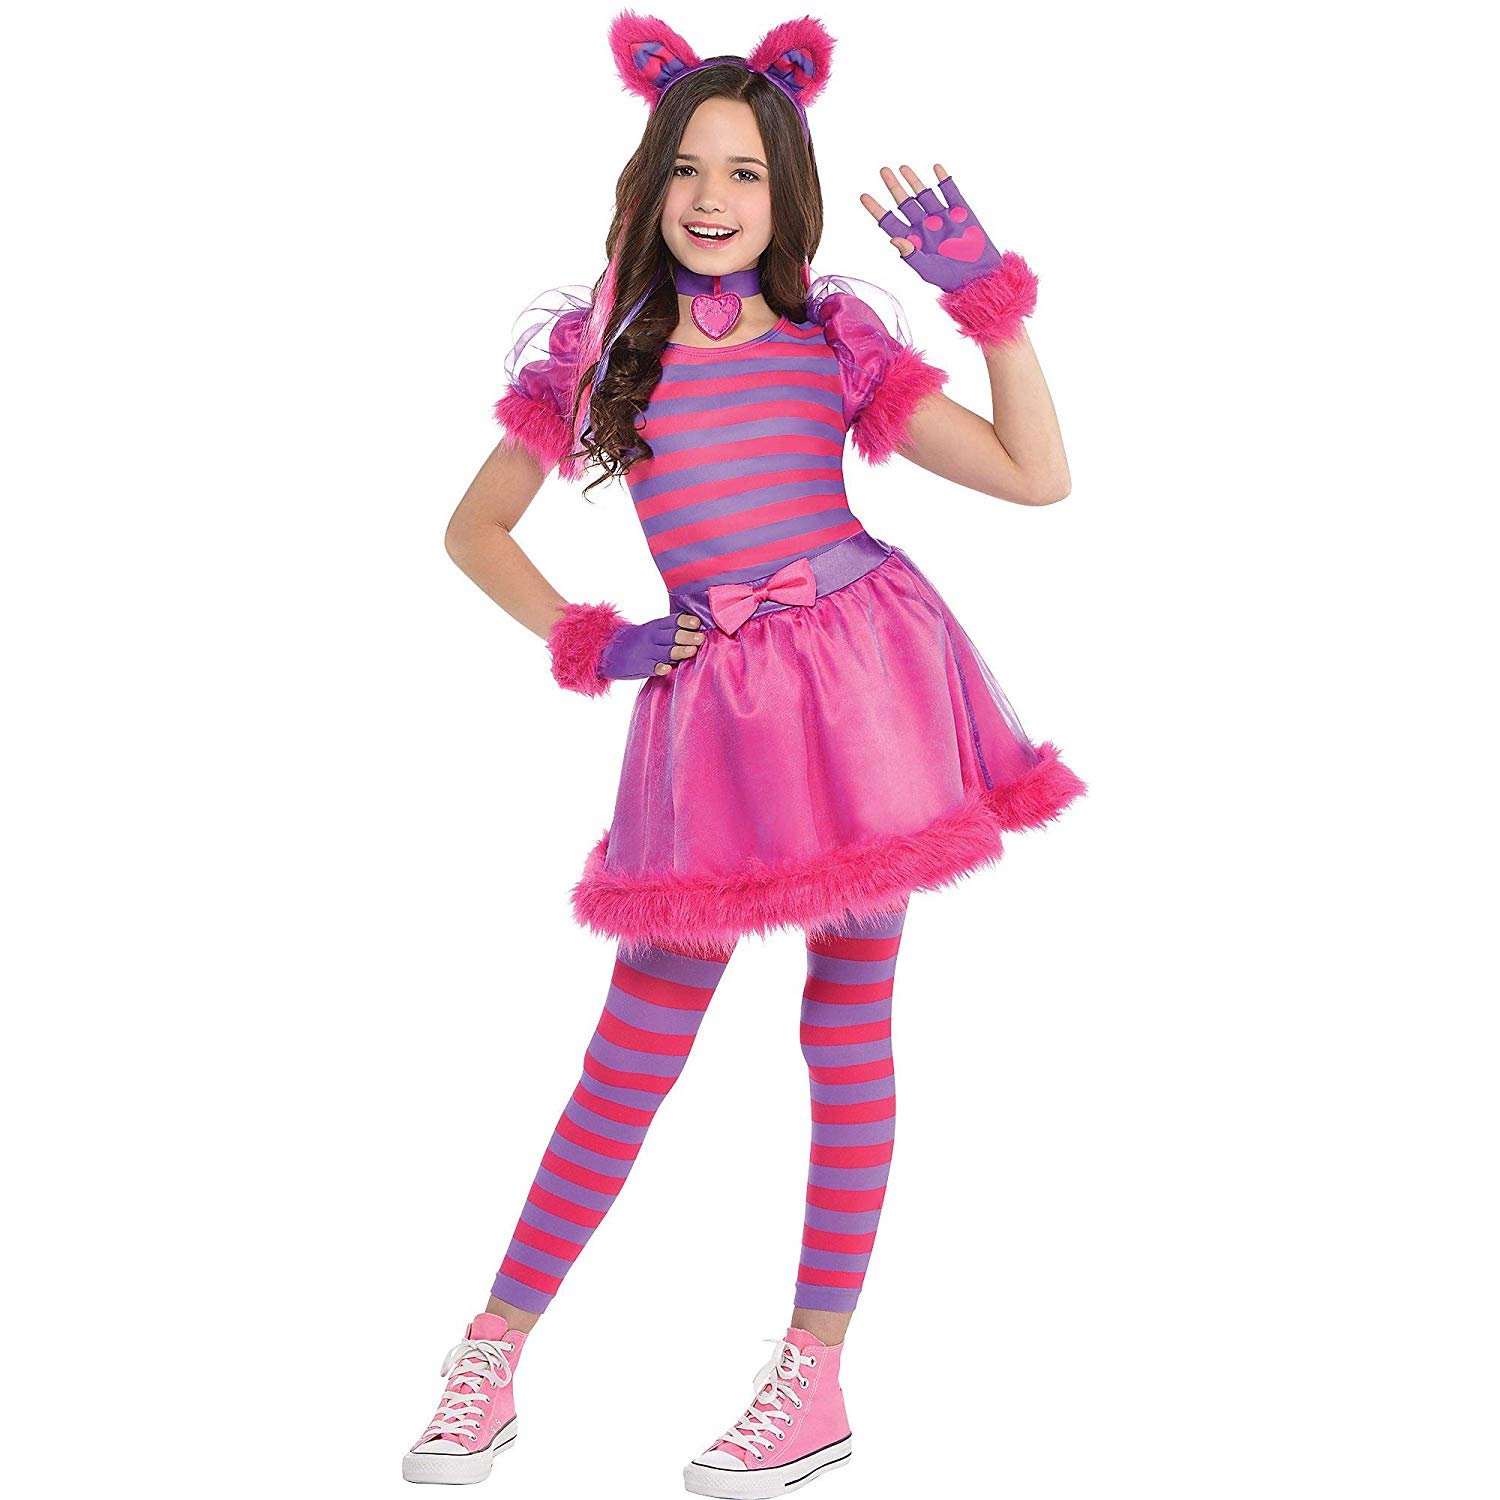 AMSCAN Cheshire Cat Halloween Costume for Girls, Large, with Included. 